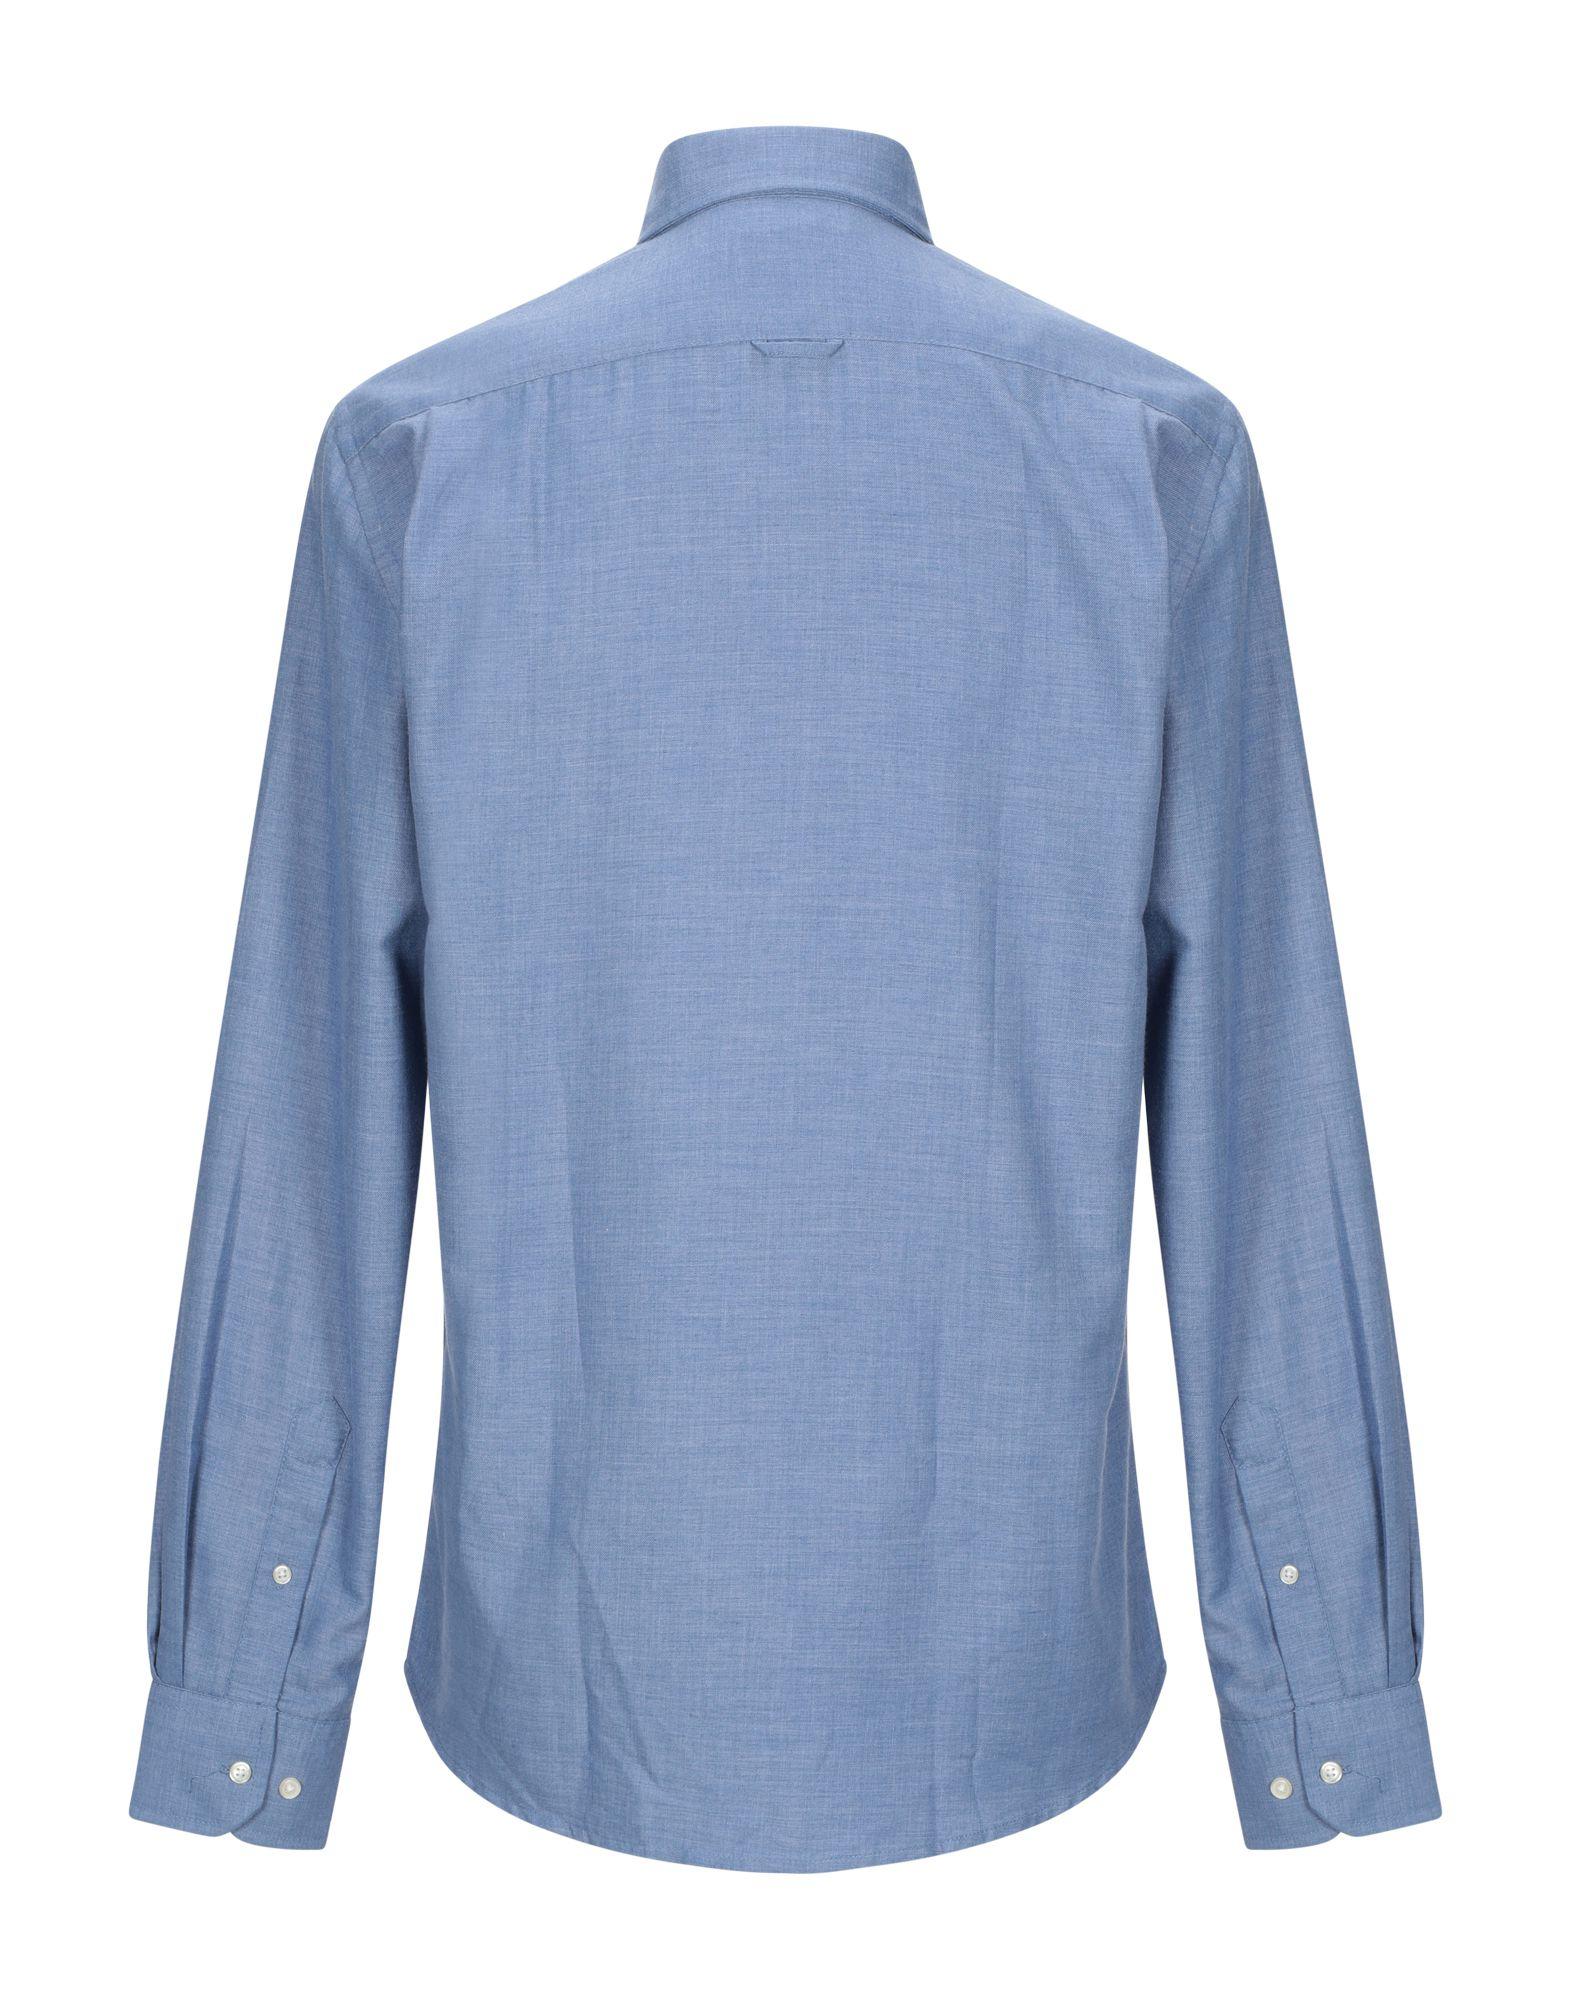 Guess Cotton Shirt in Blue for Men - Lyst